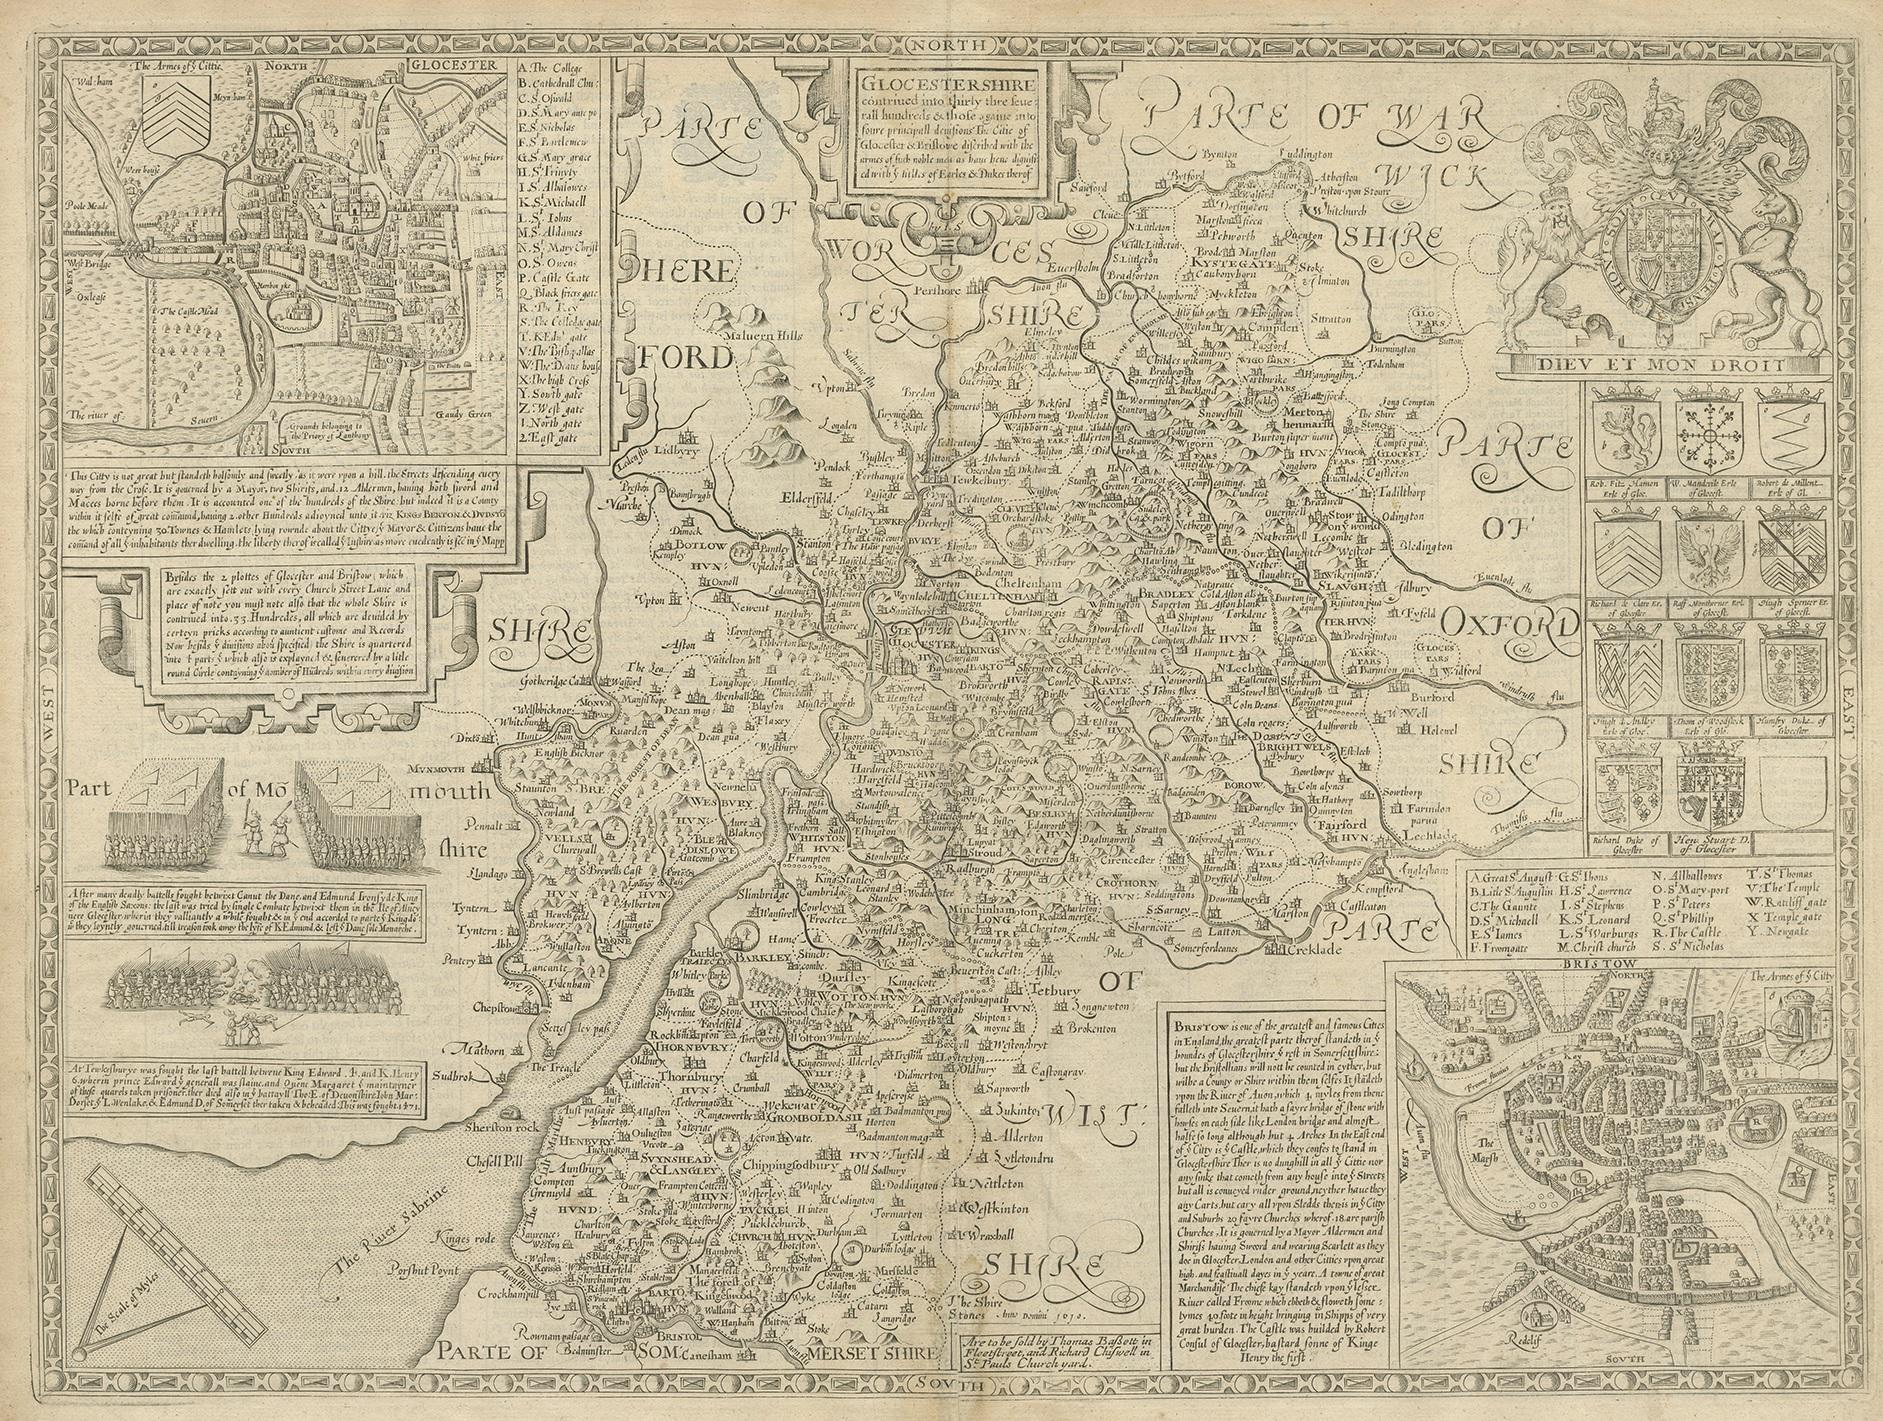 Antique map titled 'Glocestershire'. Original 17th century map of Gloucestershire, South West England, by John Speed. With inset town plans of Gloucester and Bristol. Published by Thomas Bassett & Richard Chiswell, 1676.